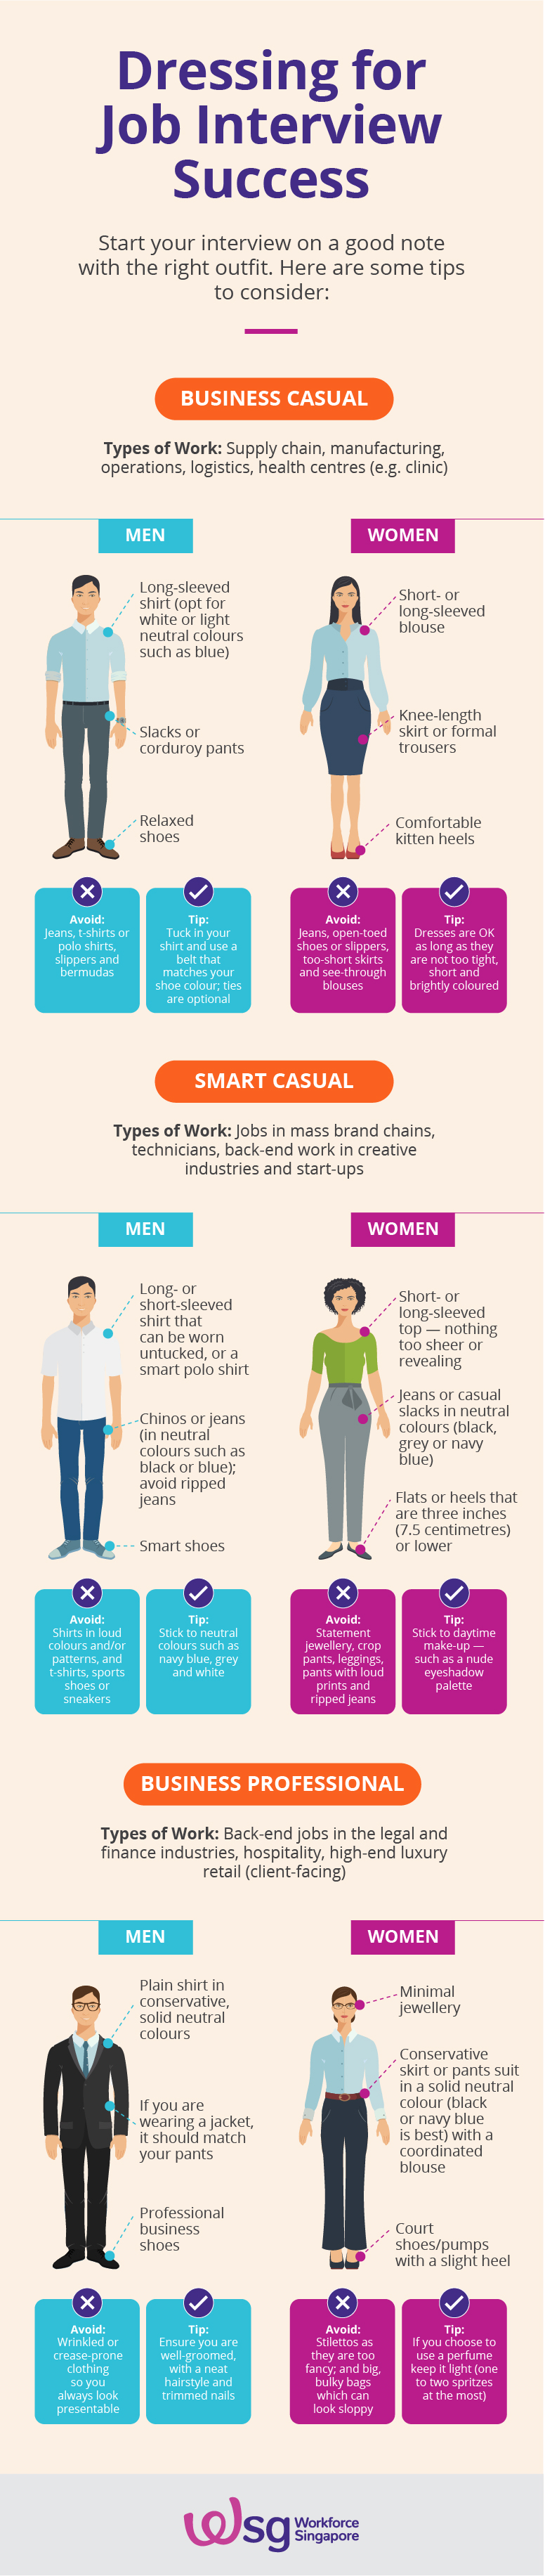 Dressing for Job Interview: How to Make a Great Impression | MyCareersFuture